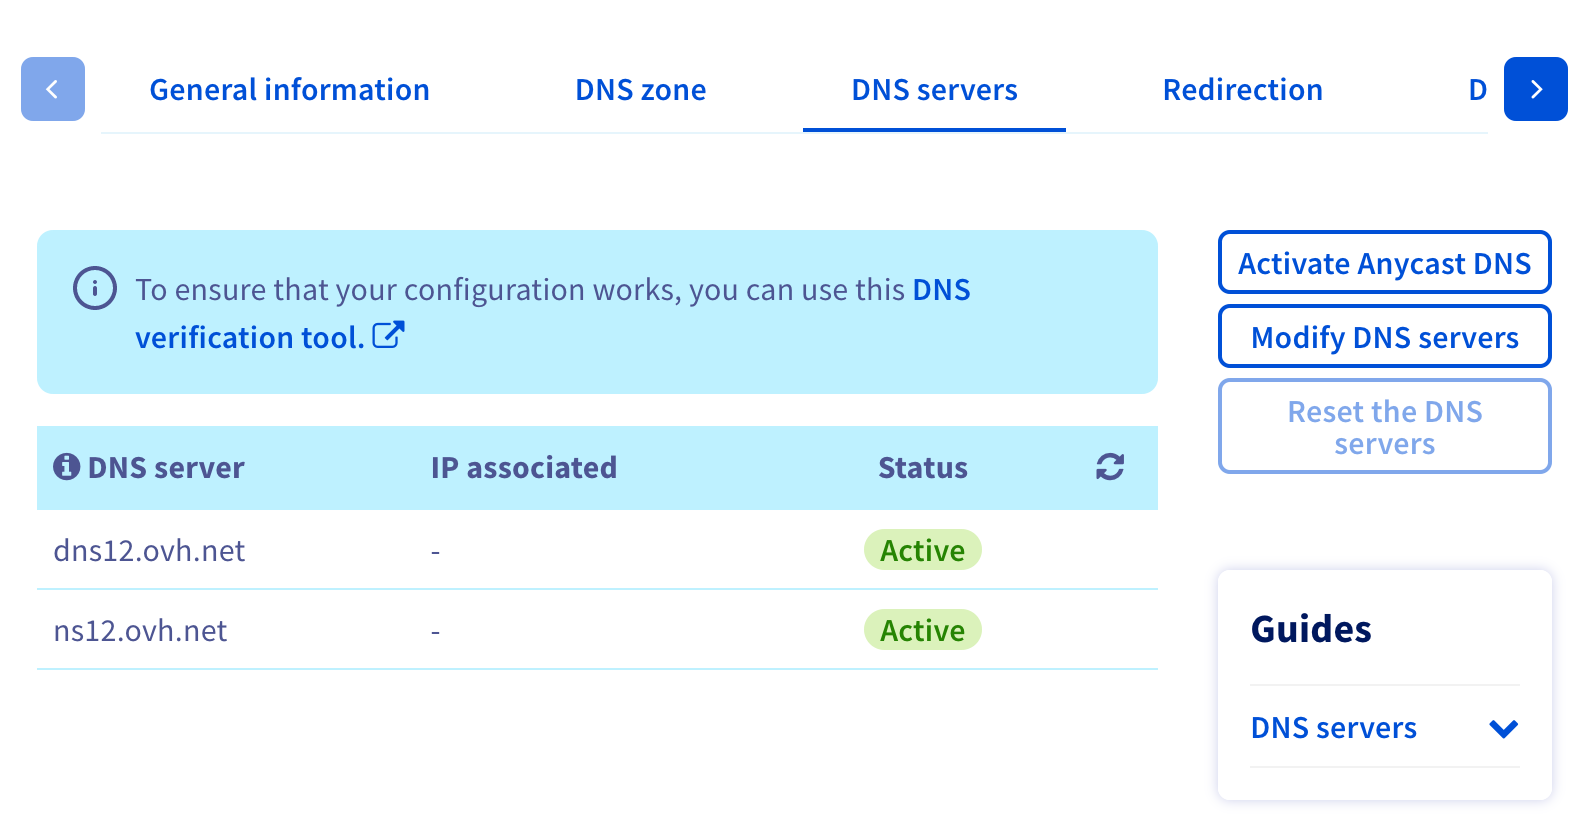 dns servers section